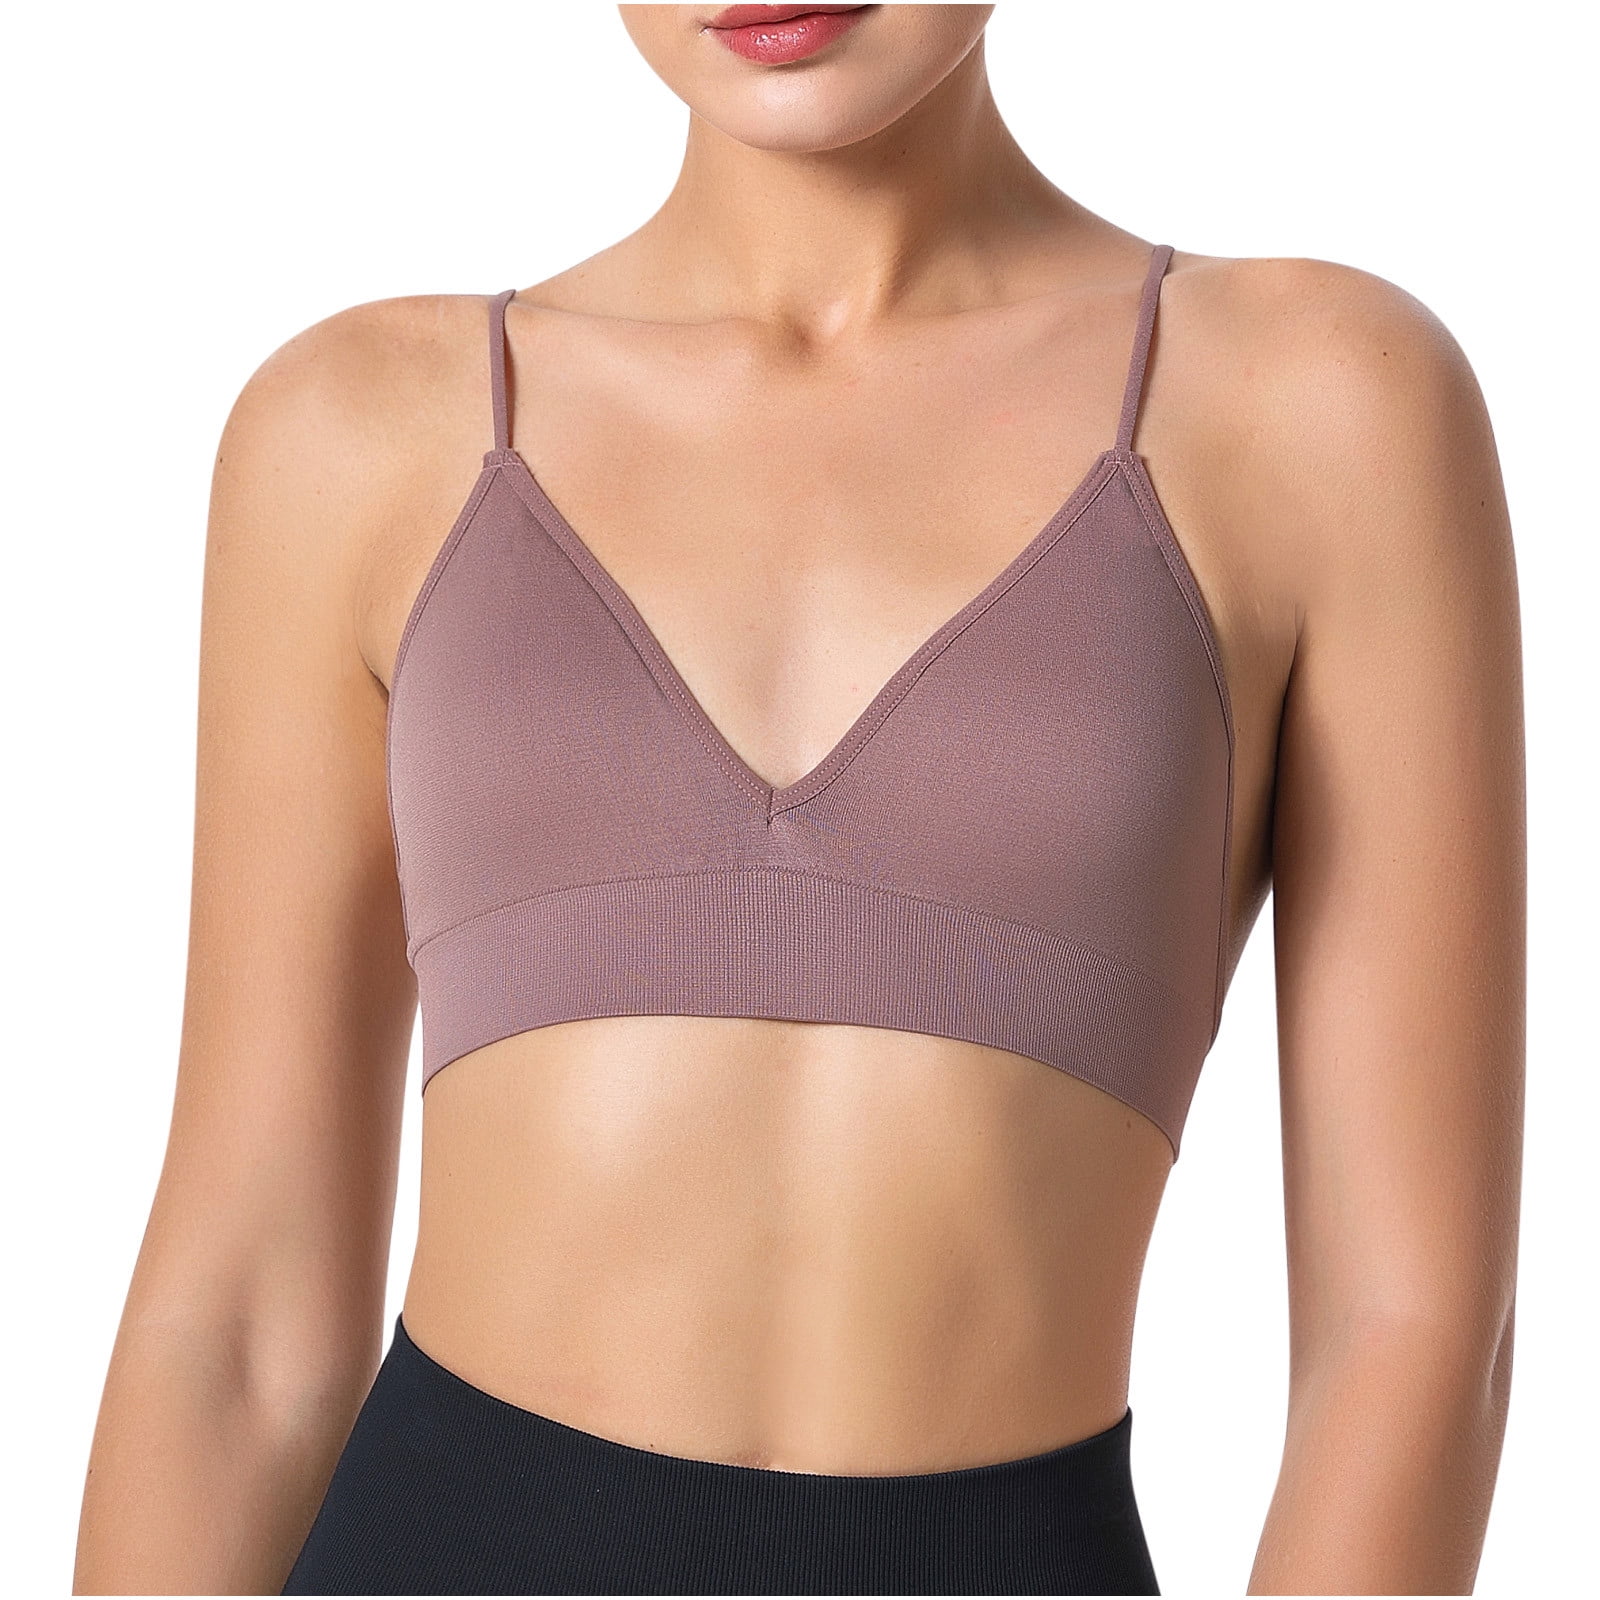 Mrat Clearance Breezies Bras Clearance Woman Ladies Bra Without